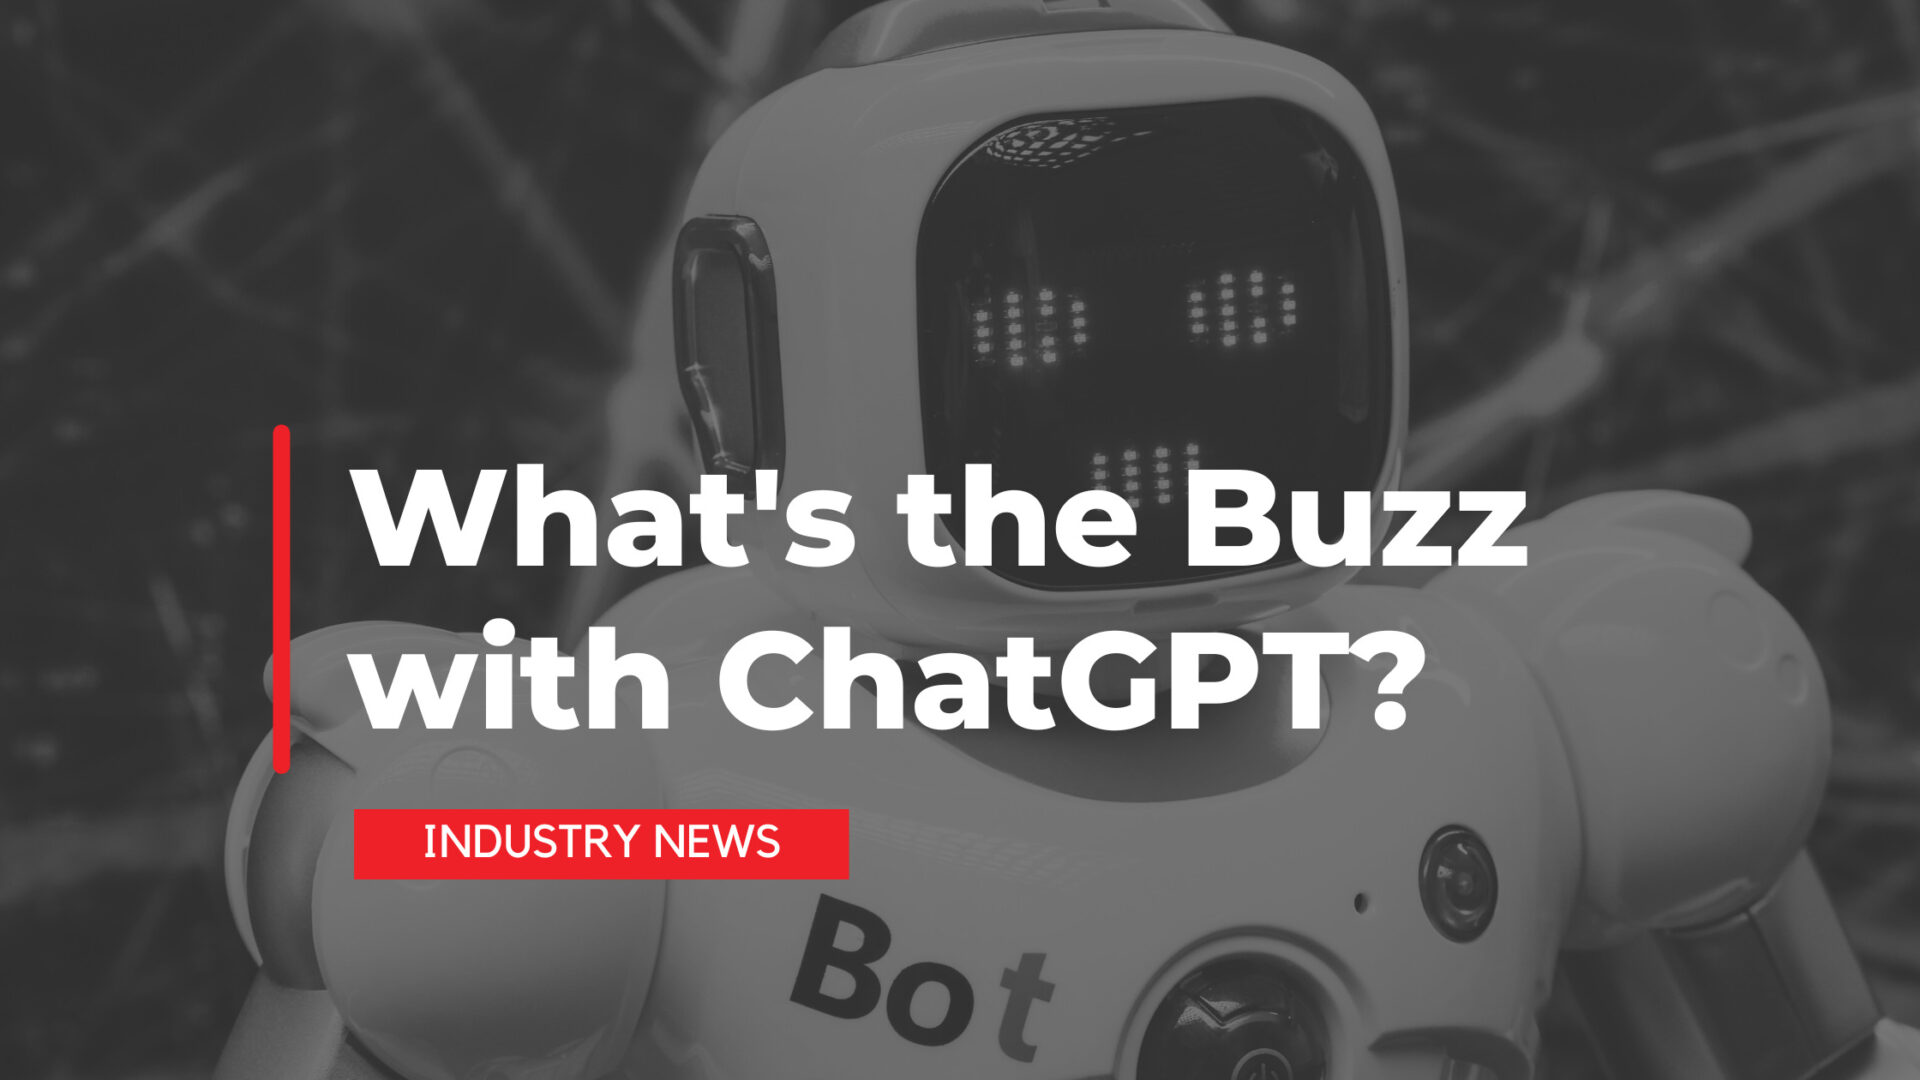 What’s the Buzz with ChatGPT?